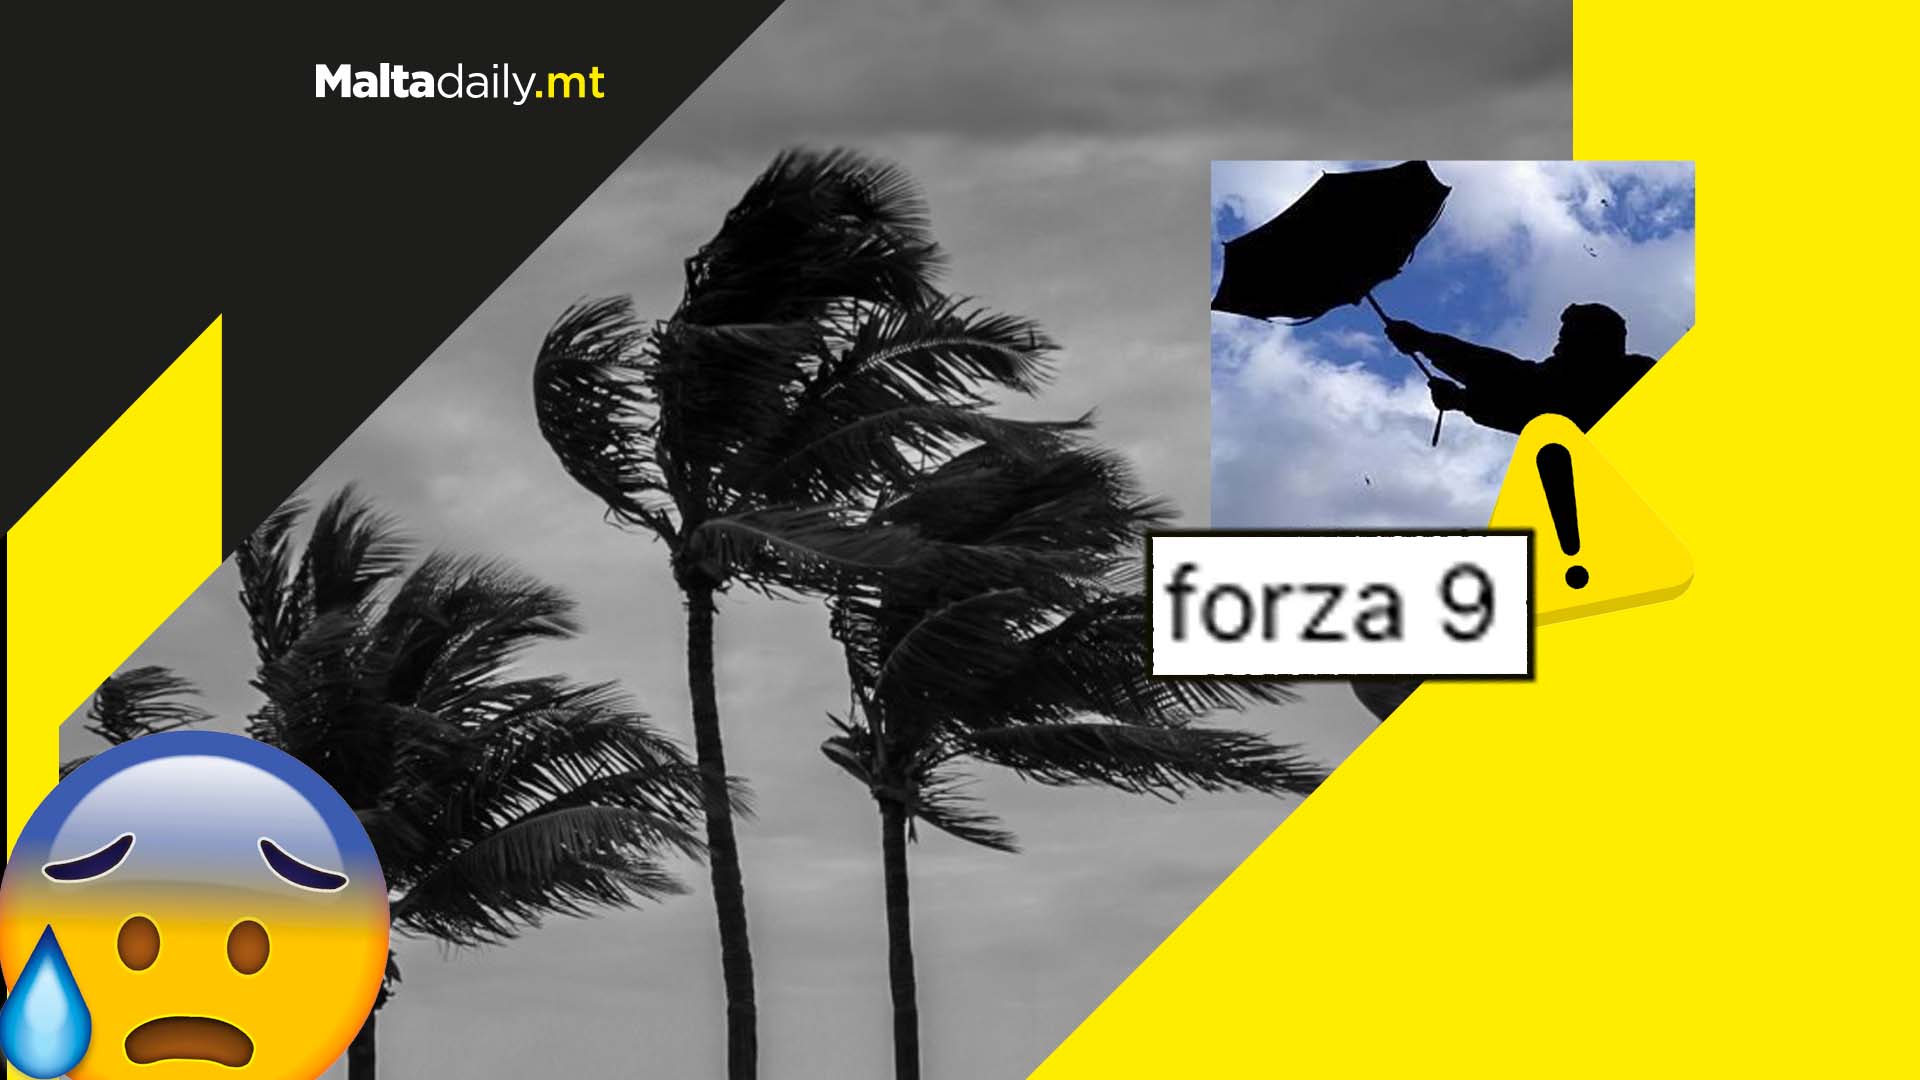 Force 9 winds could return and hit Malta this evening